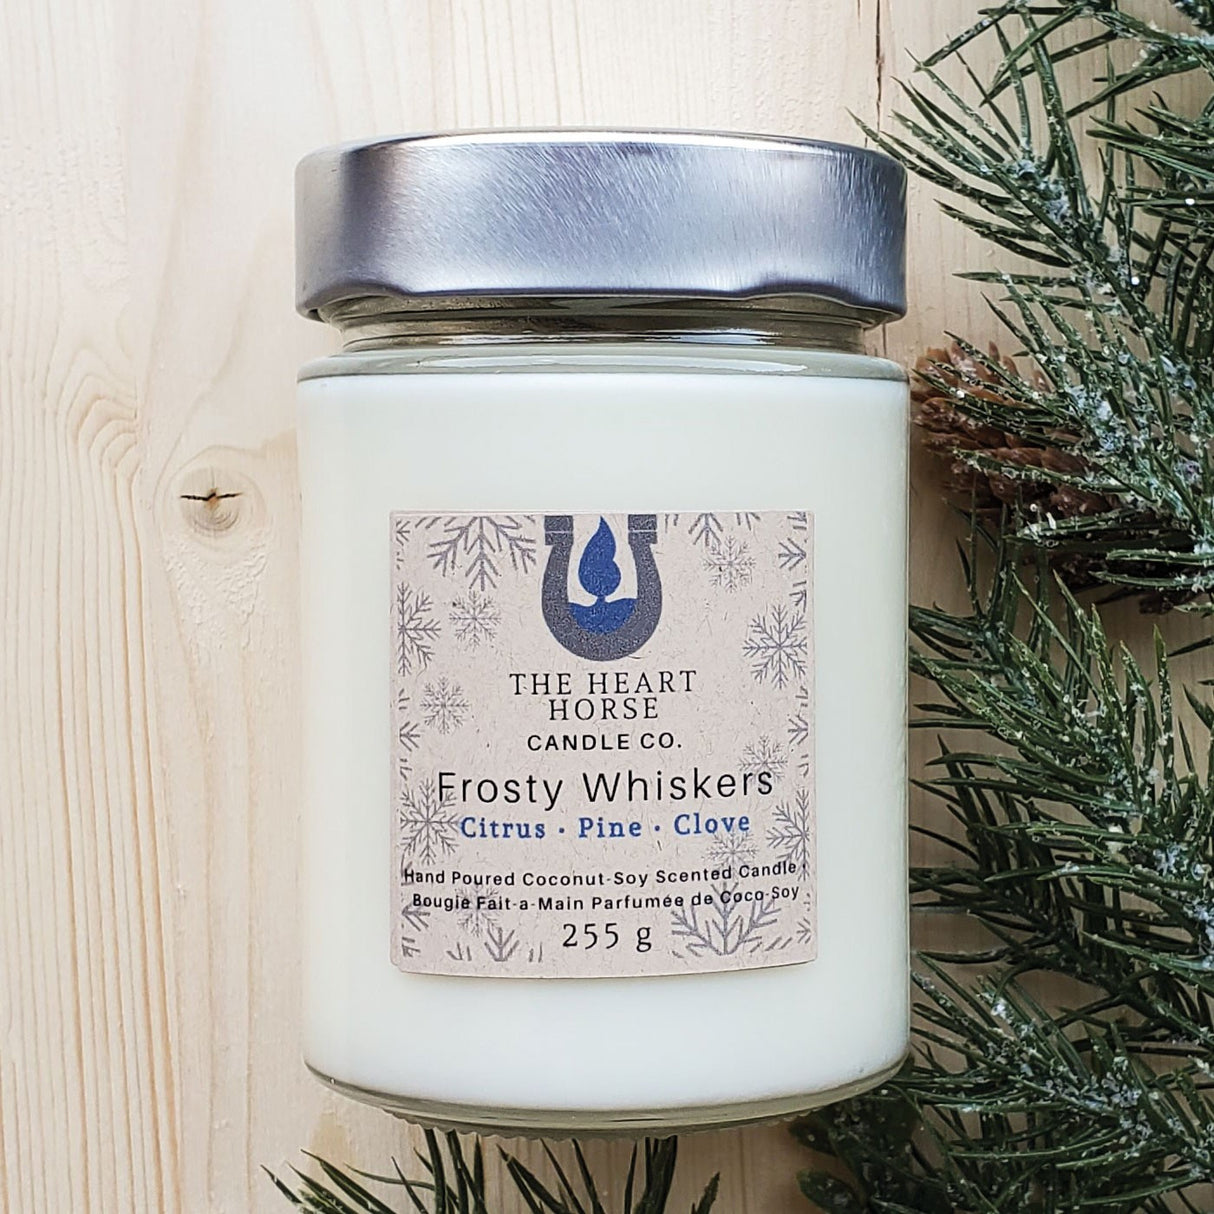 The Heart Horse Candle Co. Frosty Whiskers Candle